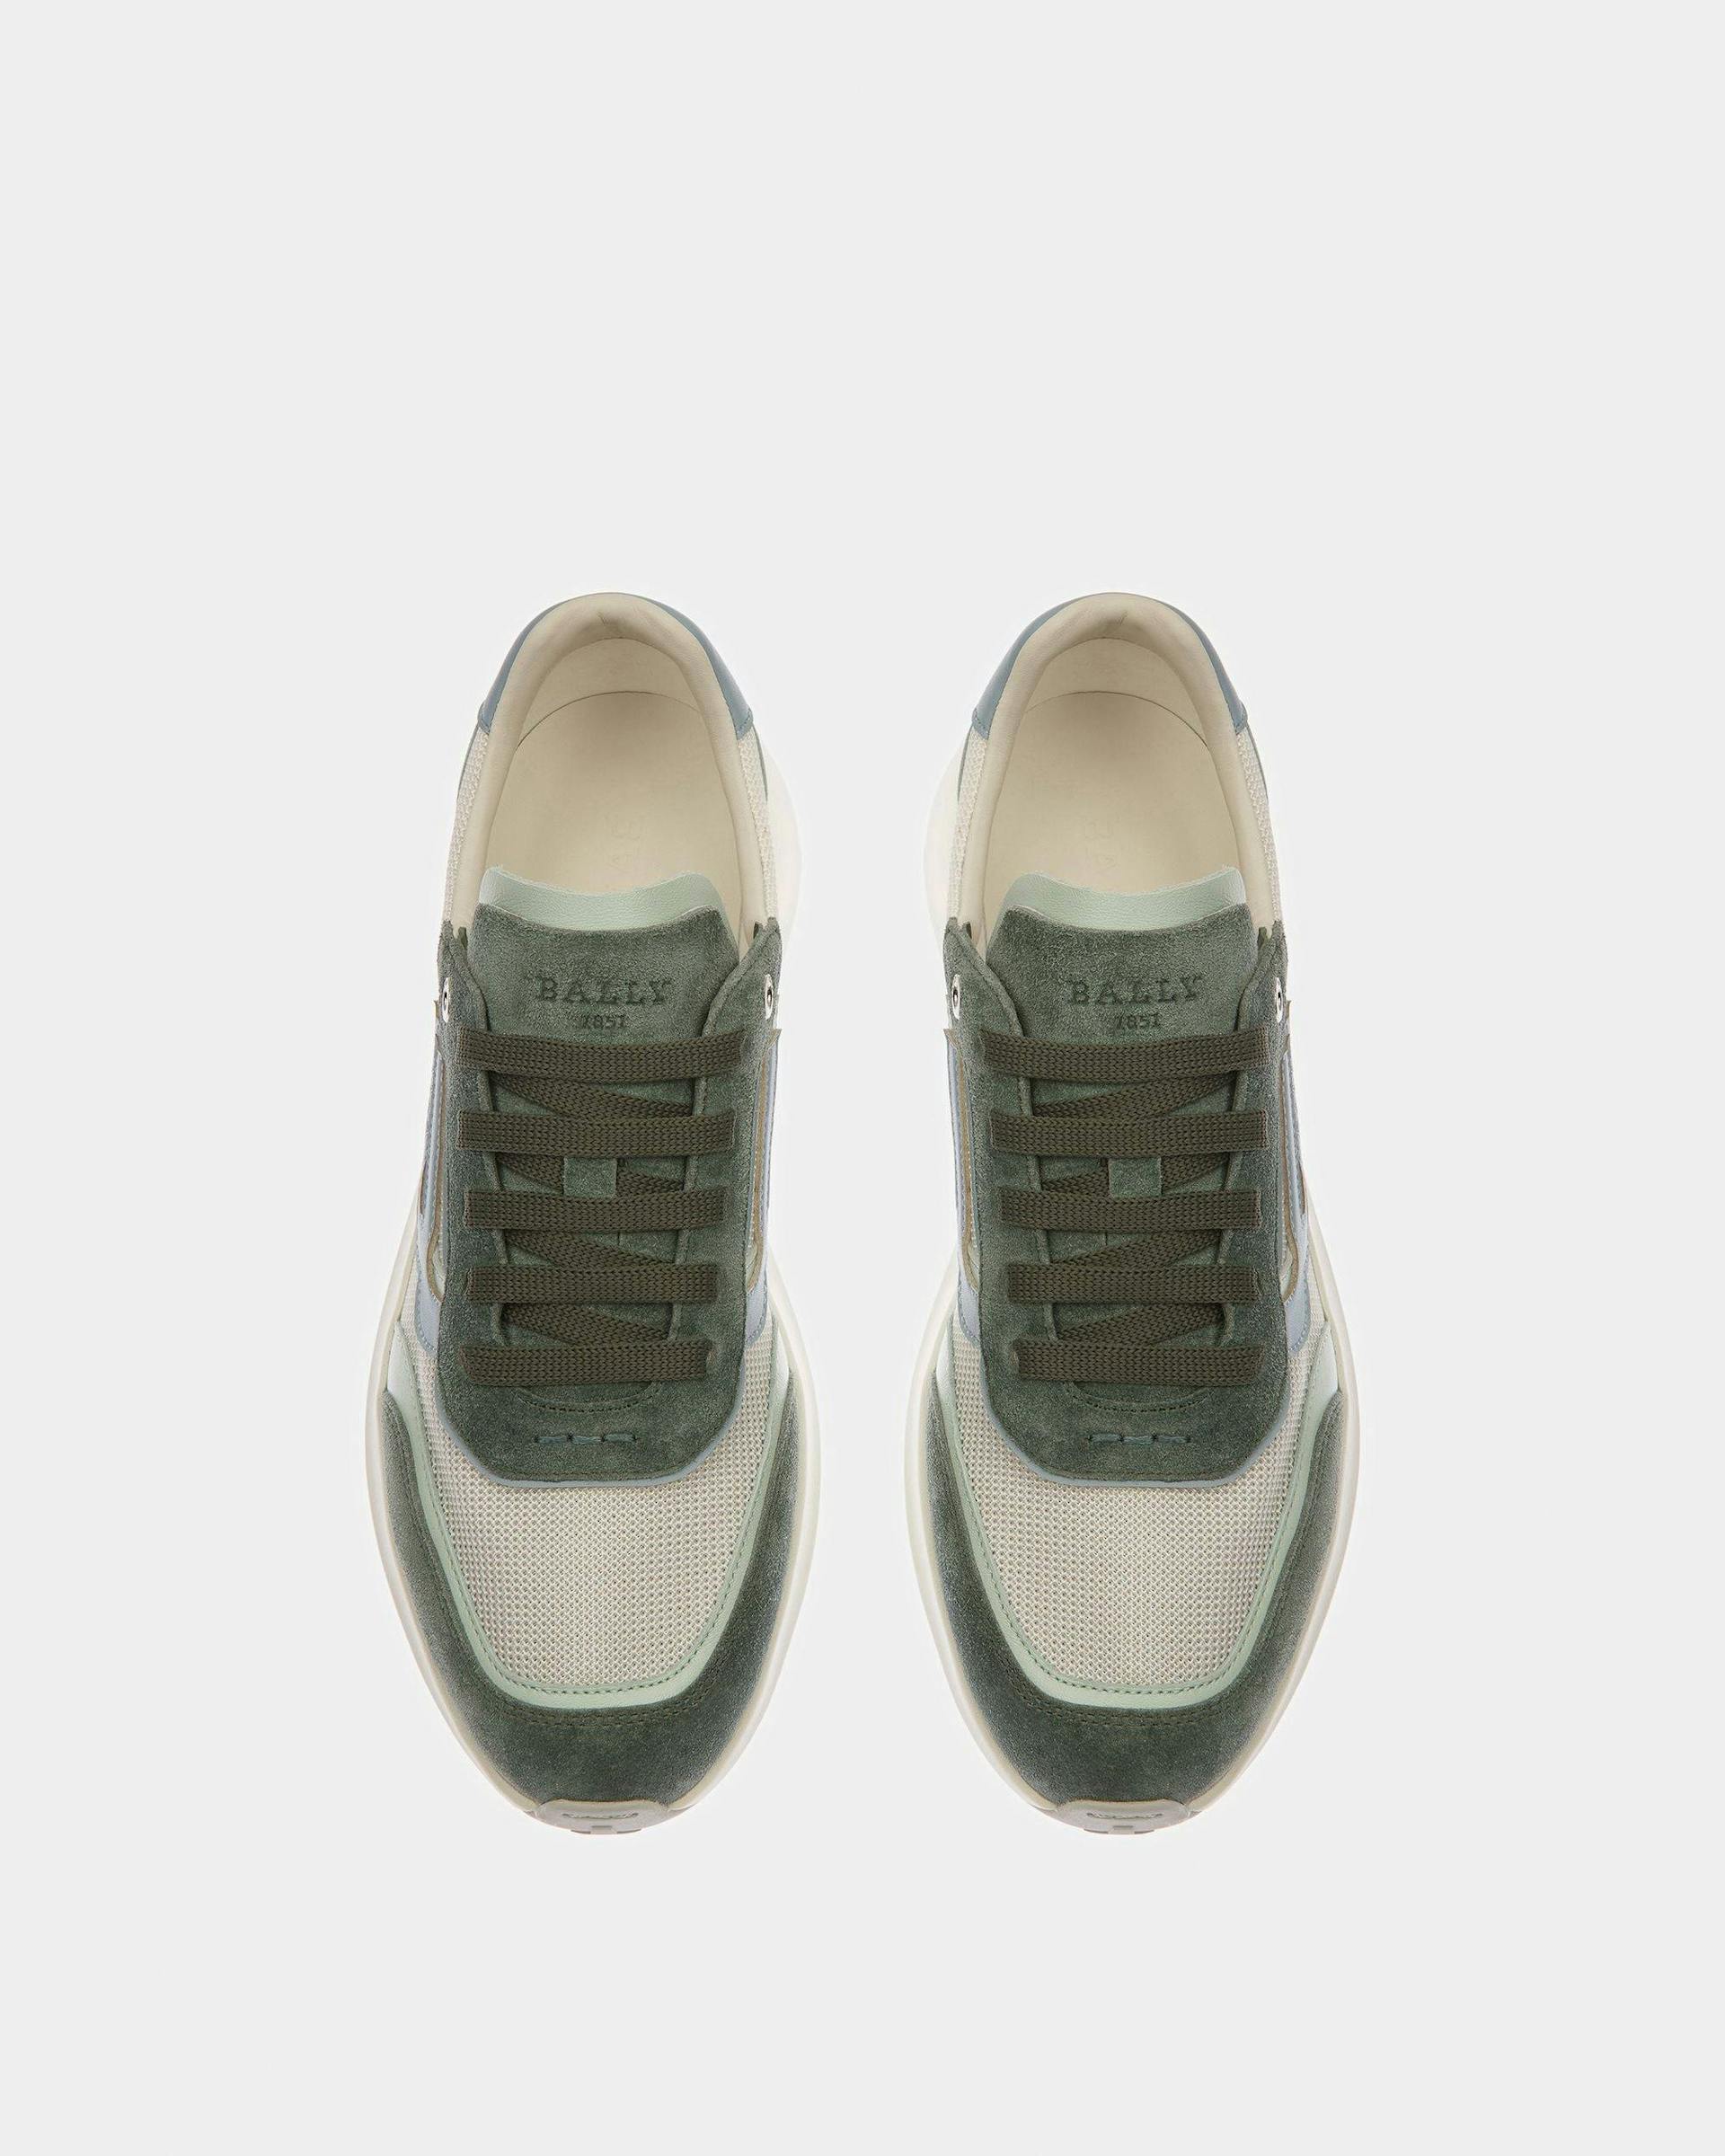 Demmy-T Leather And Fabric Sneakers In Sage - Men's - Bally - 02